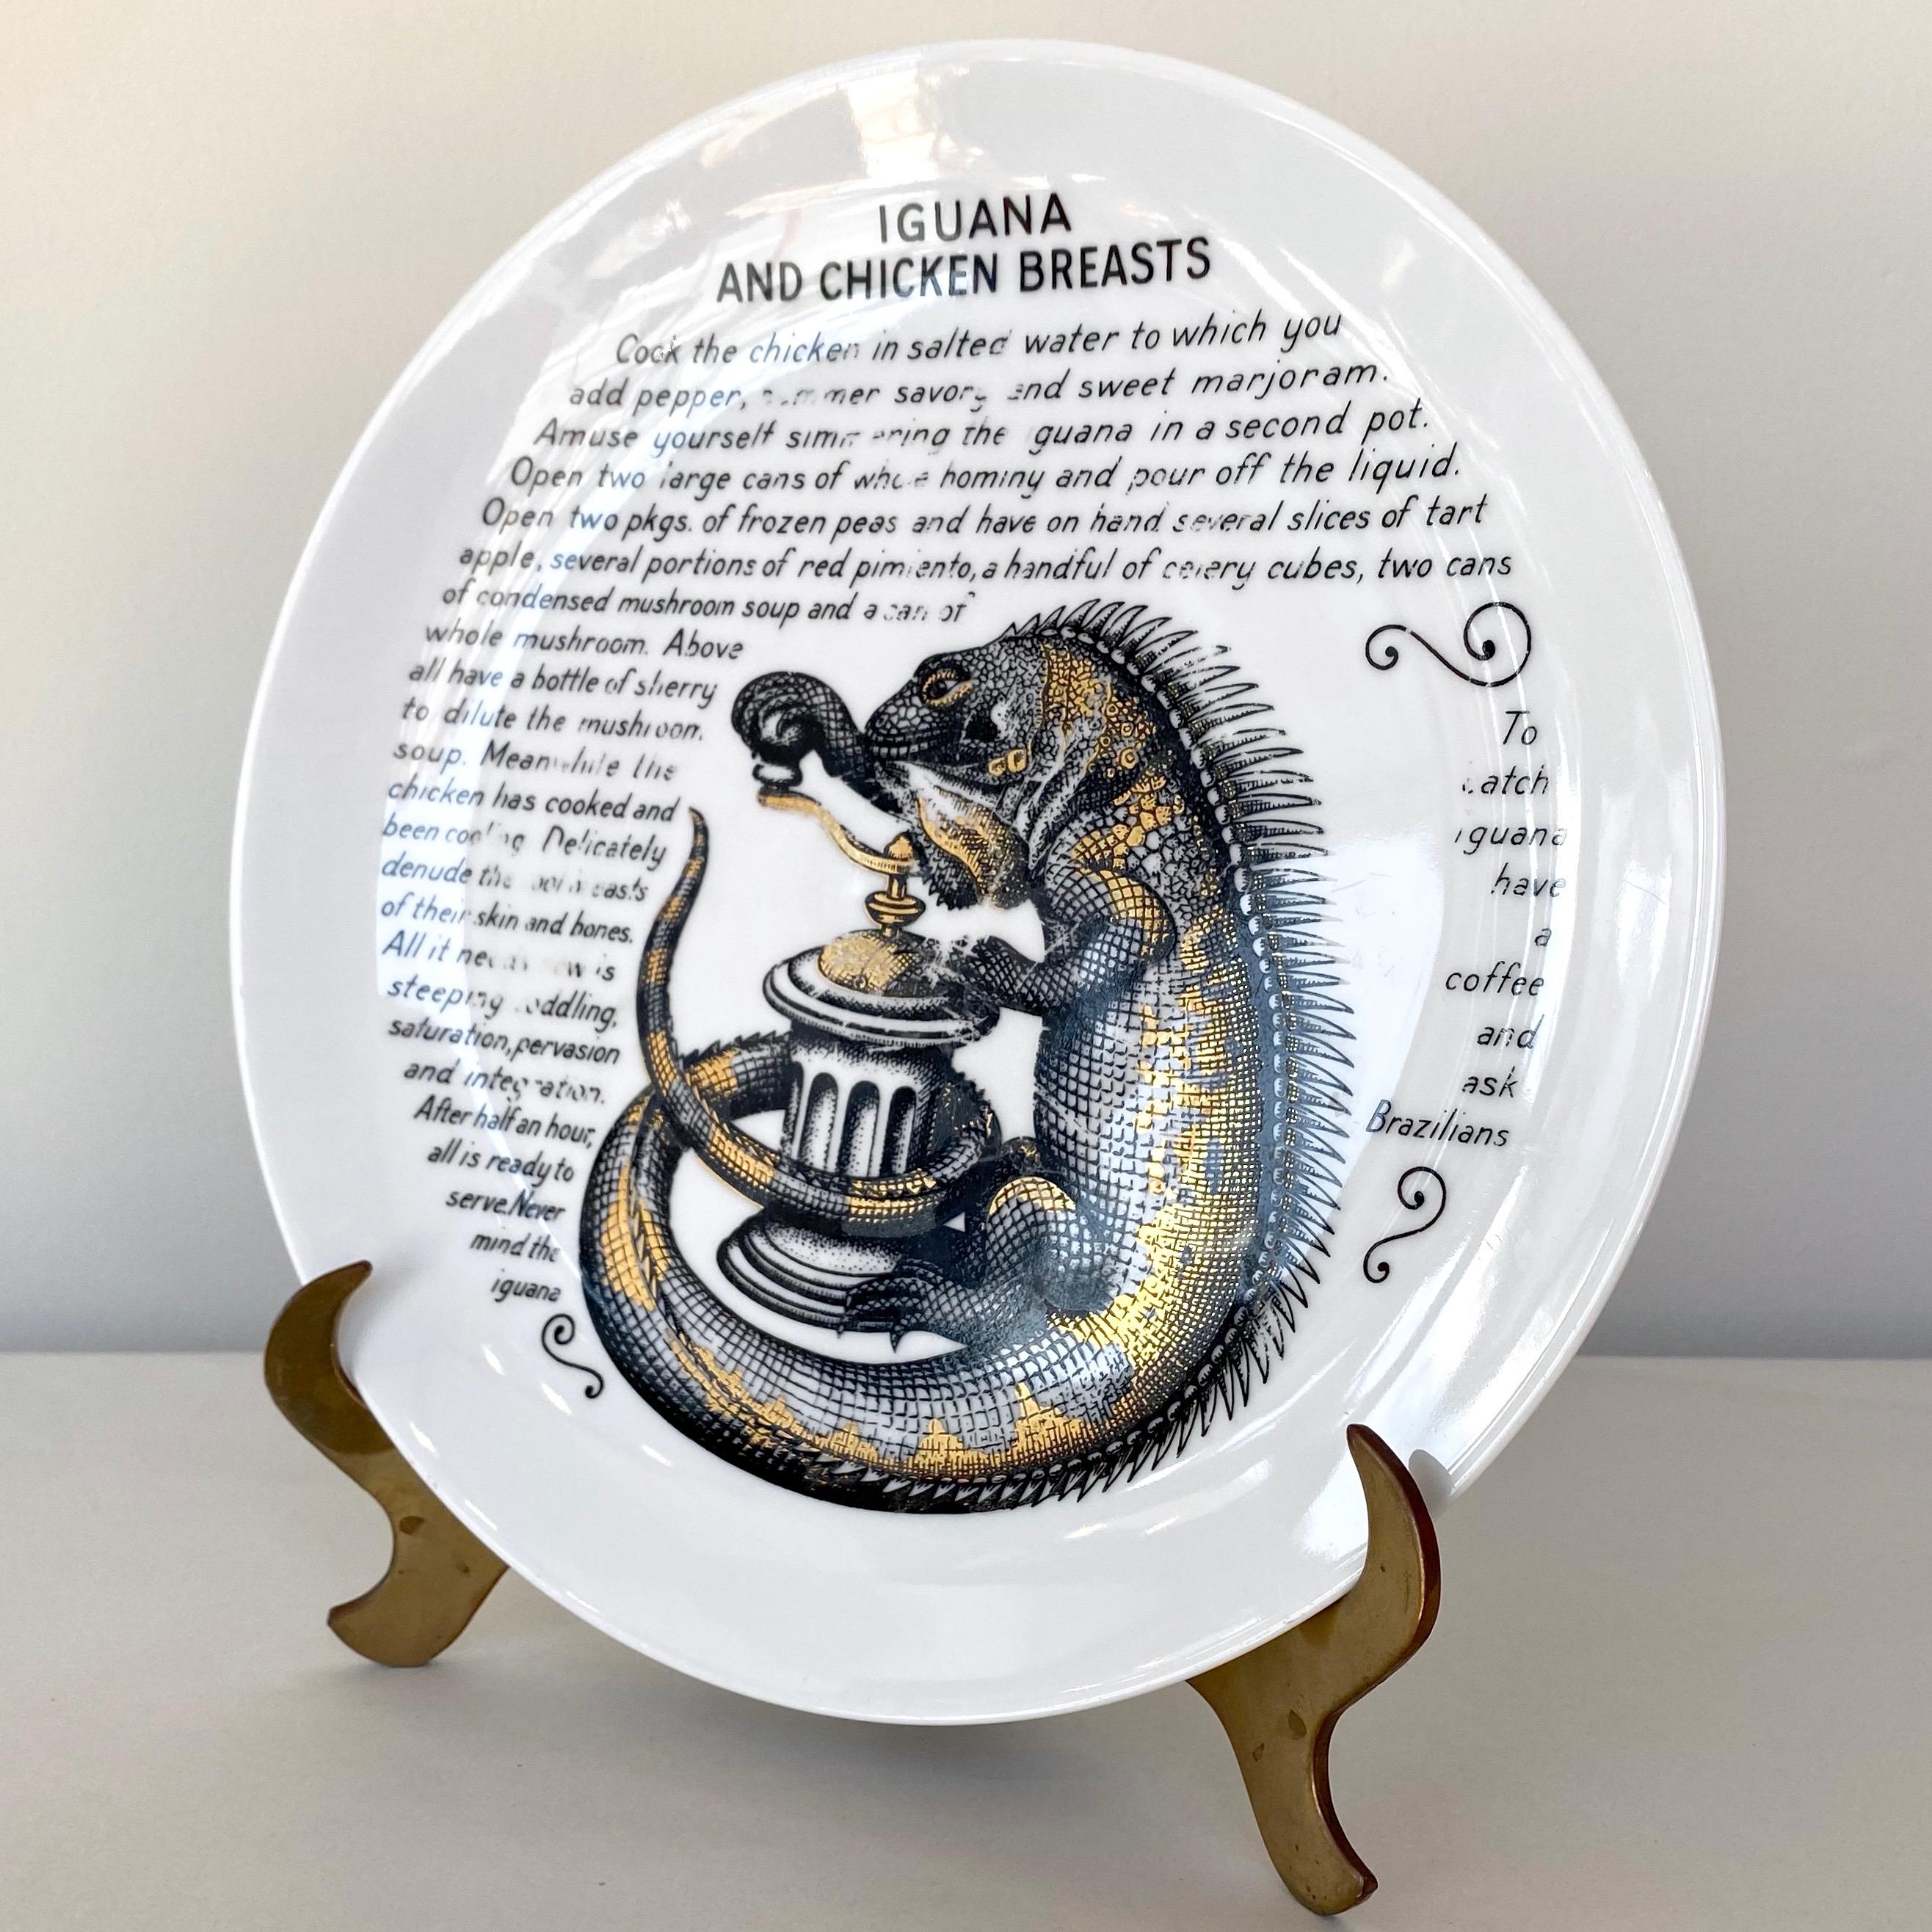 Fornasetti for Fleming Joffe “Iguana and Chicken Breasts” Recipe Plate, 1960s In Good Condition For Sale In San Francisco, CA